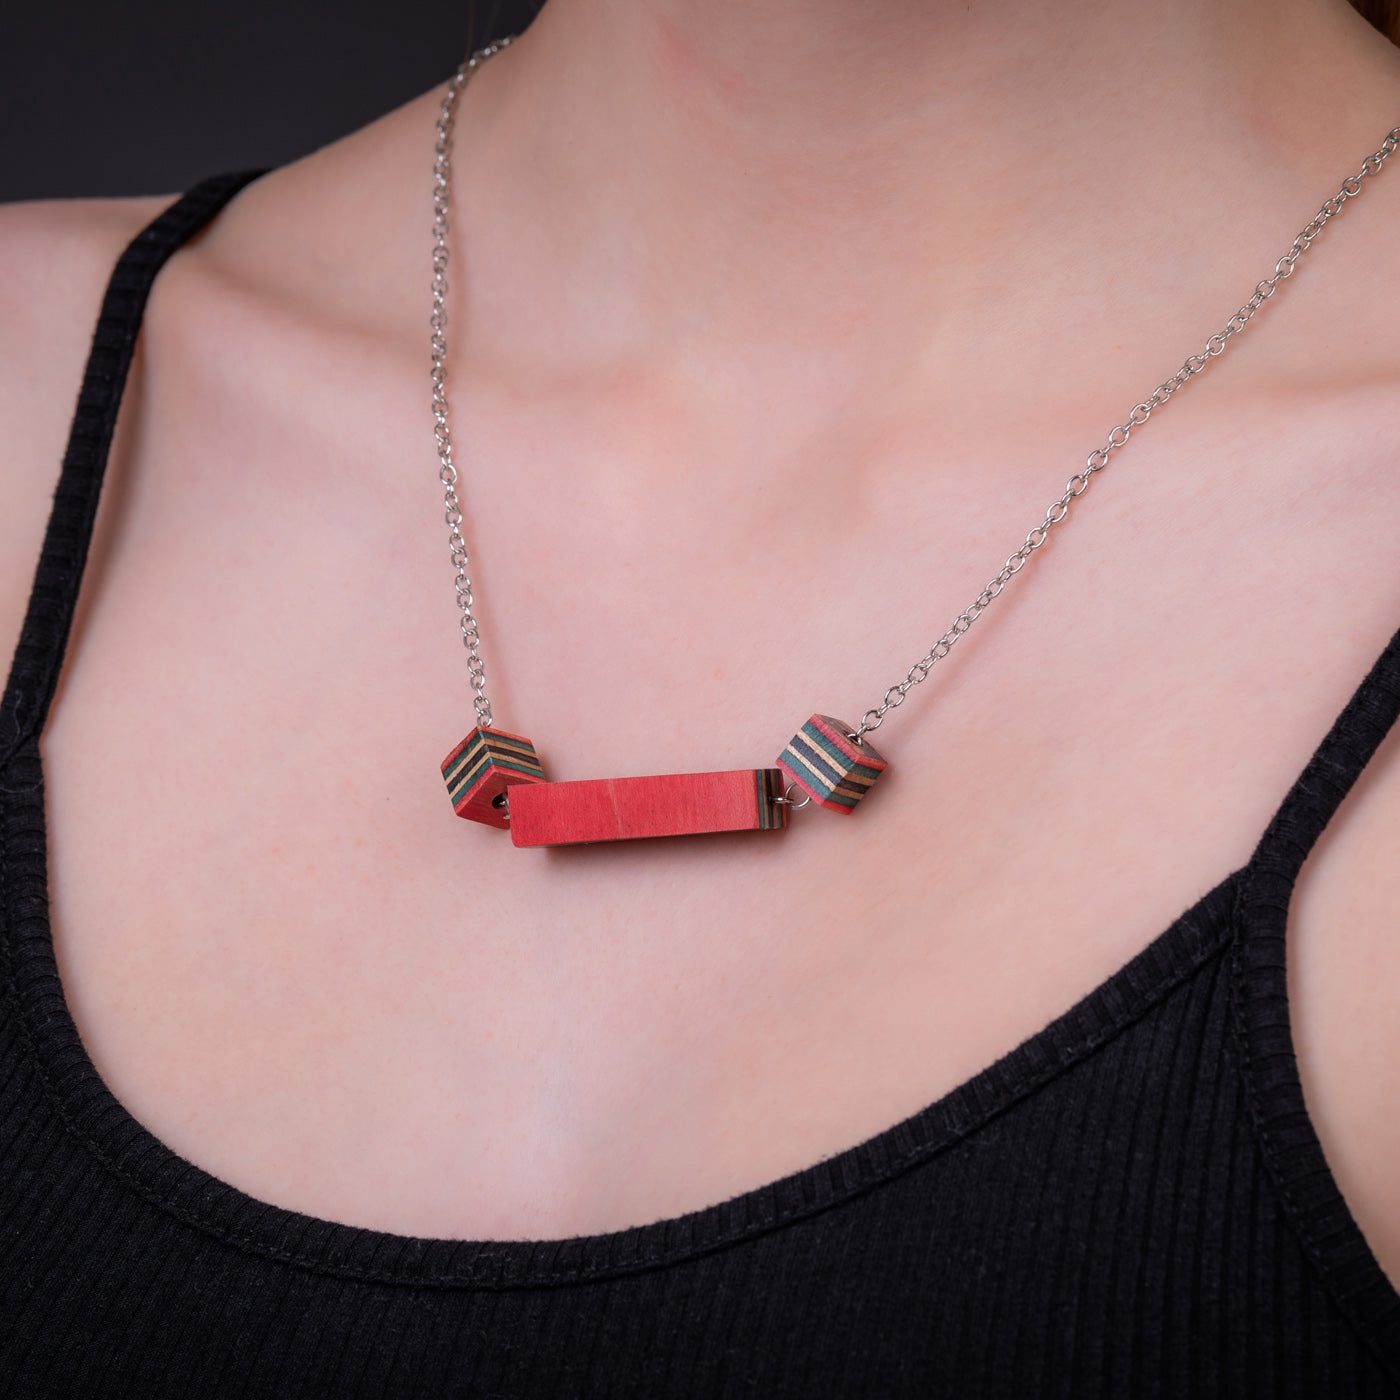 Recta Recycled Skateboard Necklace by Paguro Upcycle